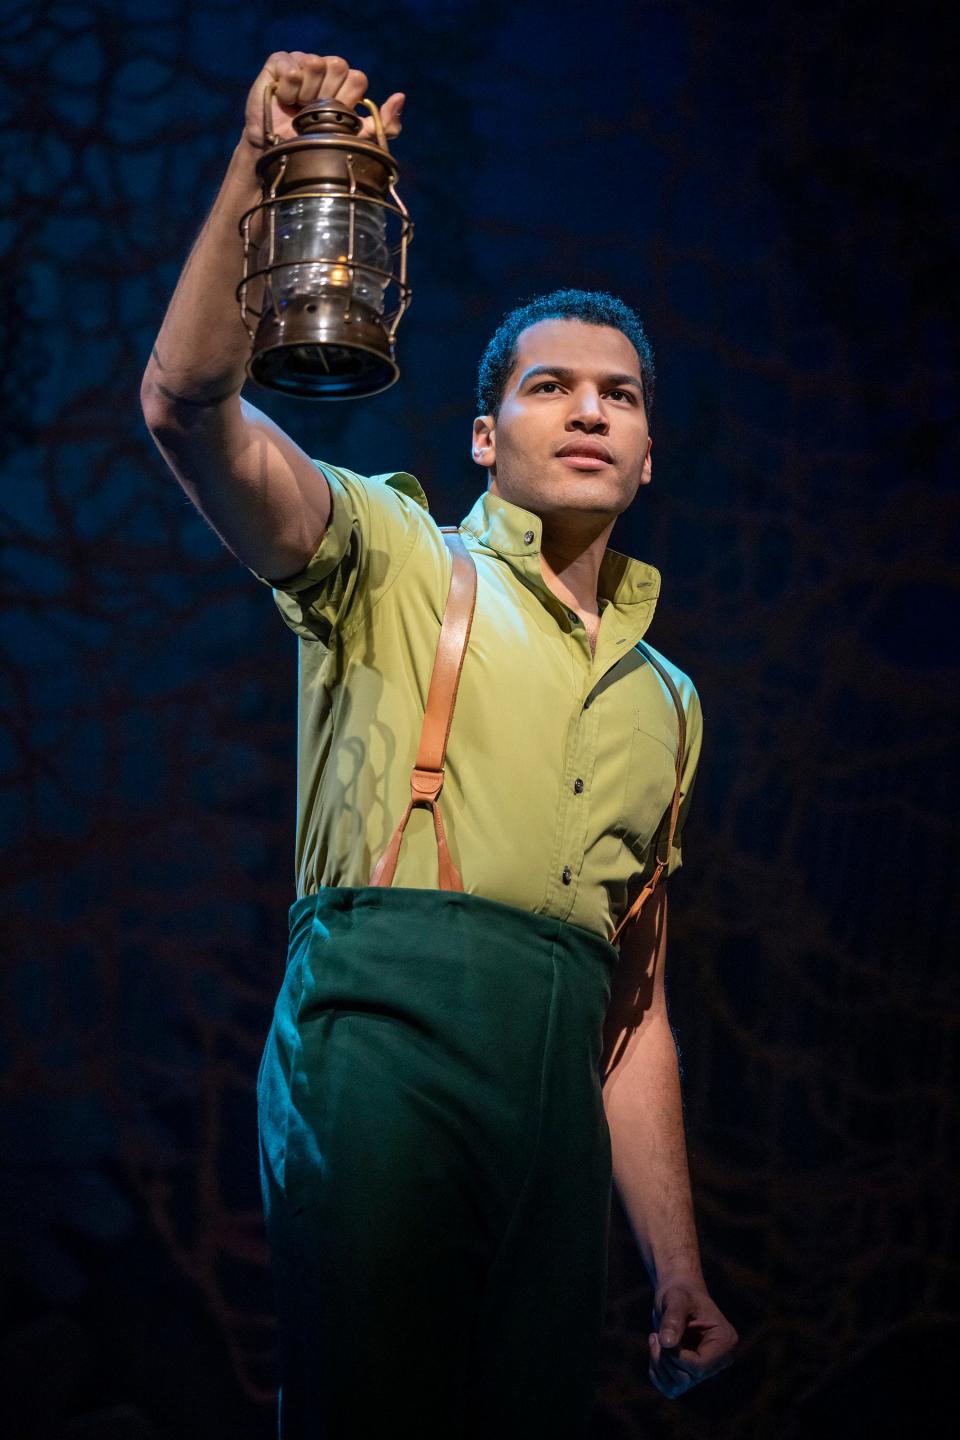 Christian Thompson is playing Fiyero in the national tour of "Wicked" at the Wharton Center May 10-28.